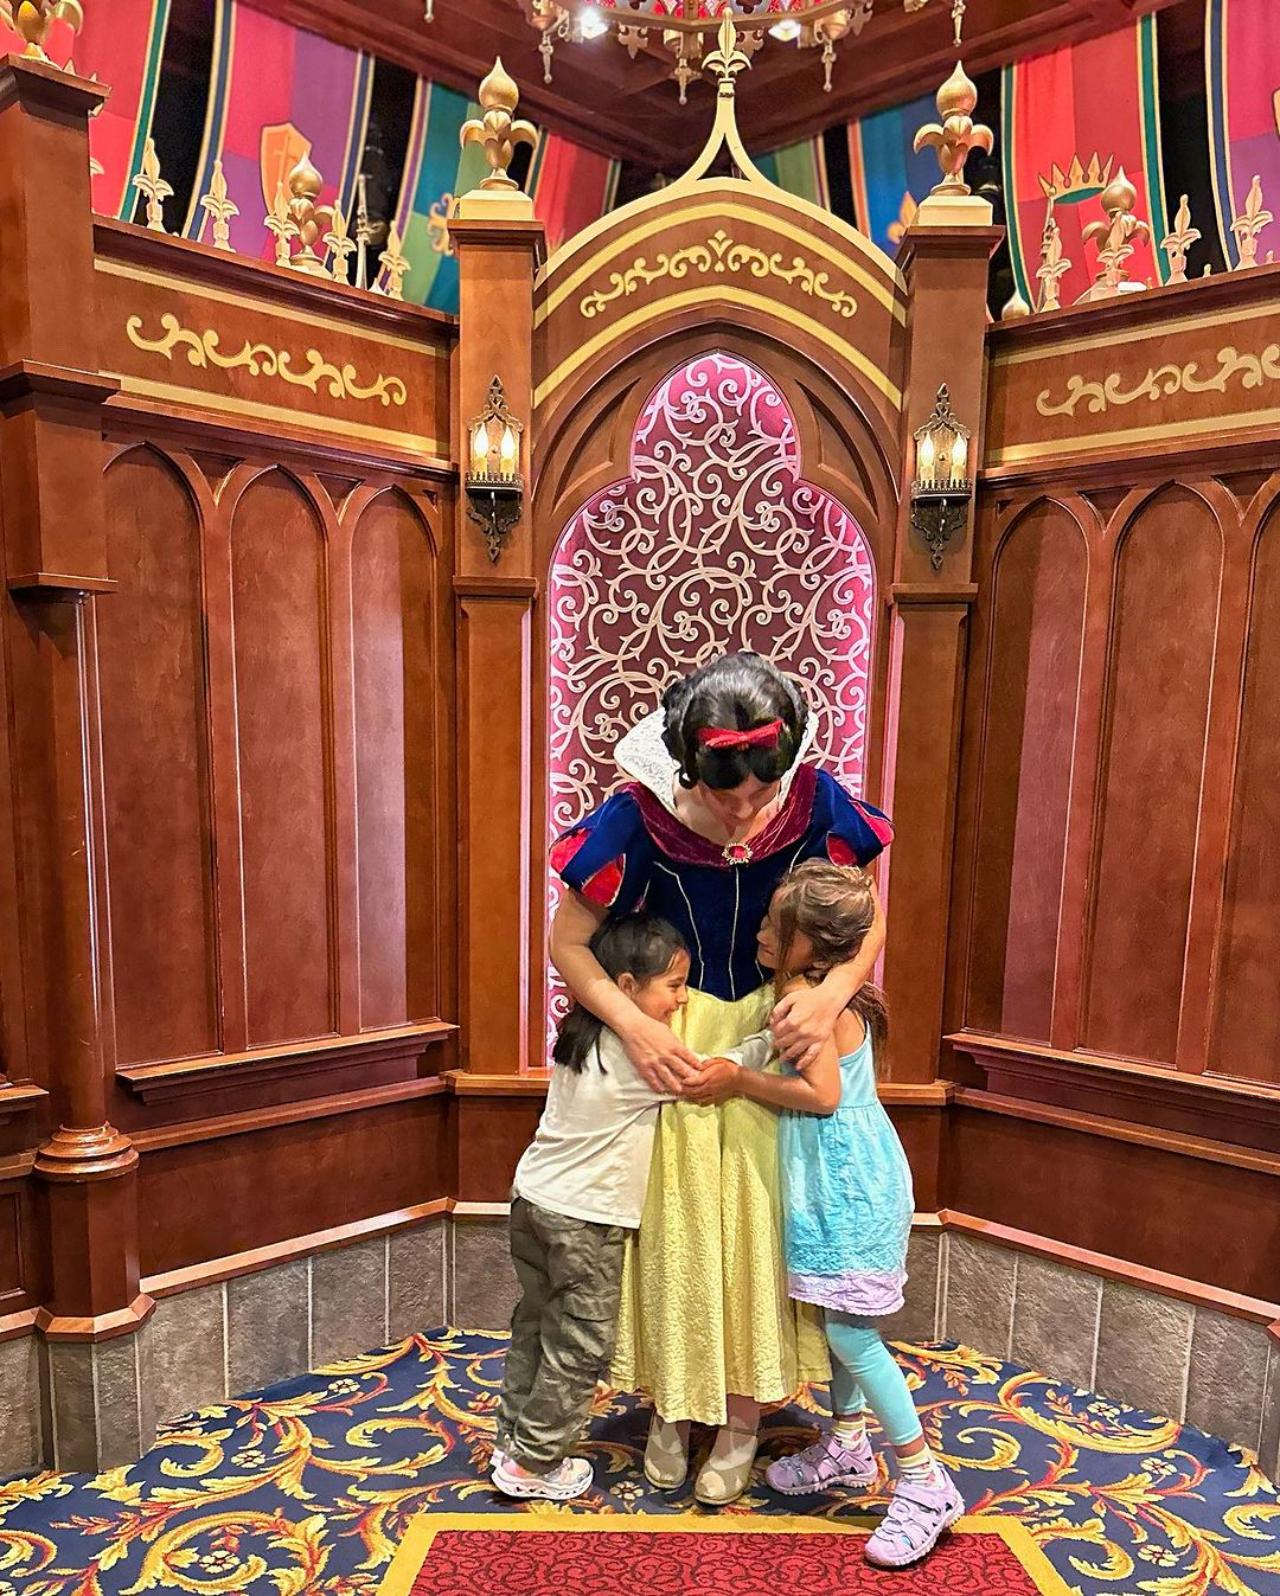 Disneyland is every child (and adult's) dream come true - here is Inaaya hugging Snow White tightly